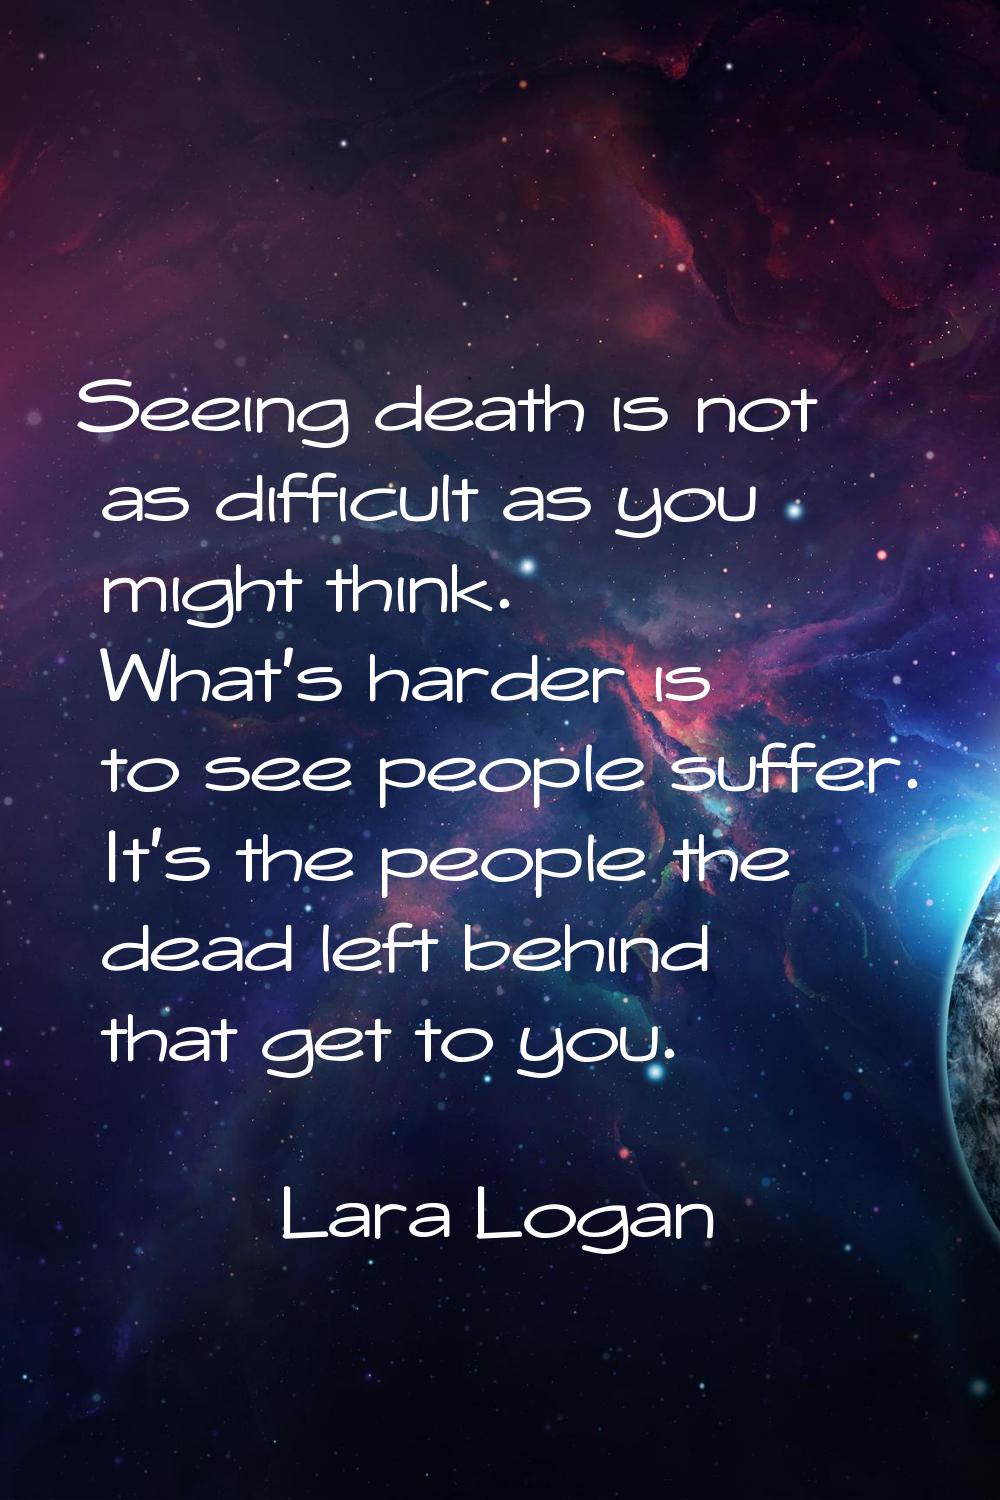 Seeing death is not as difficult as you might think. What's harder is to see people suffer. It's th